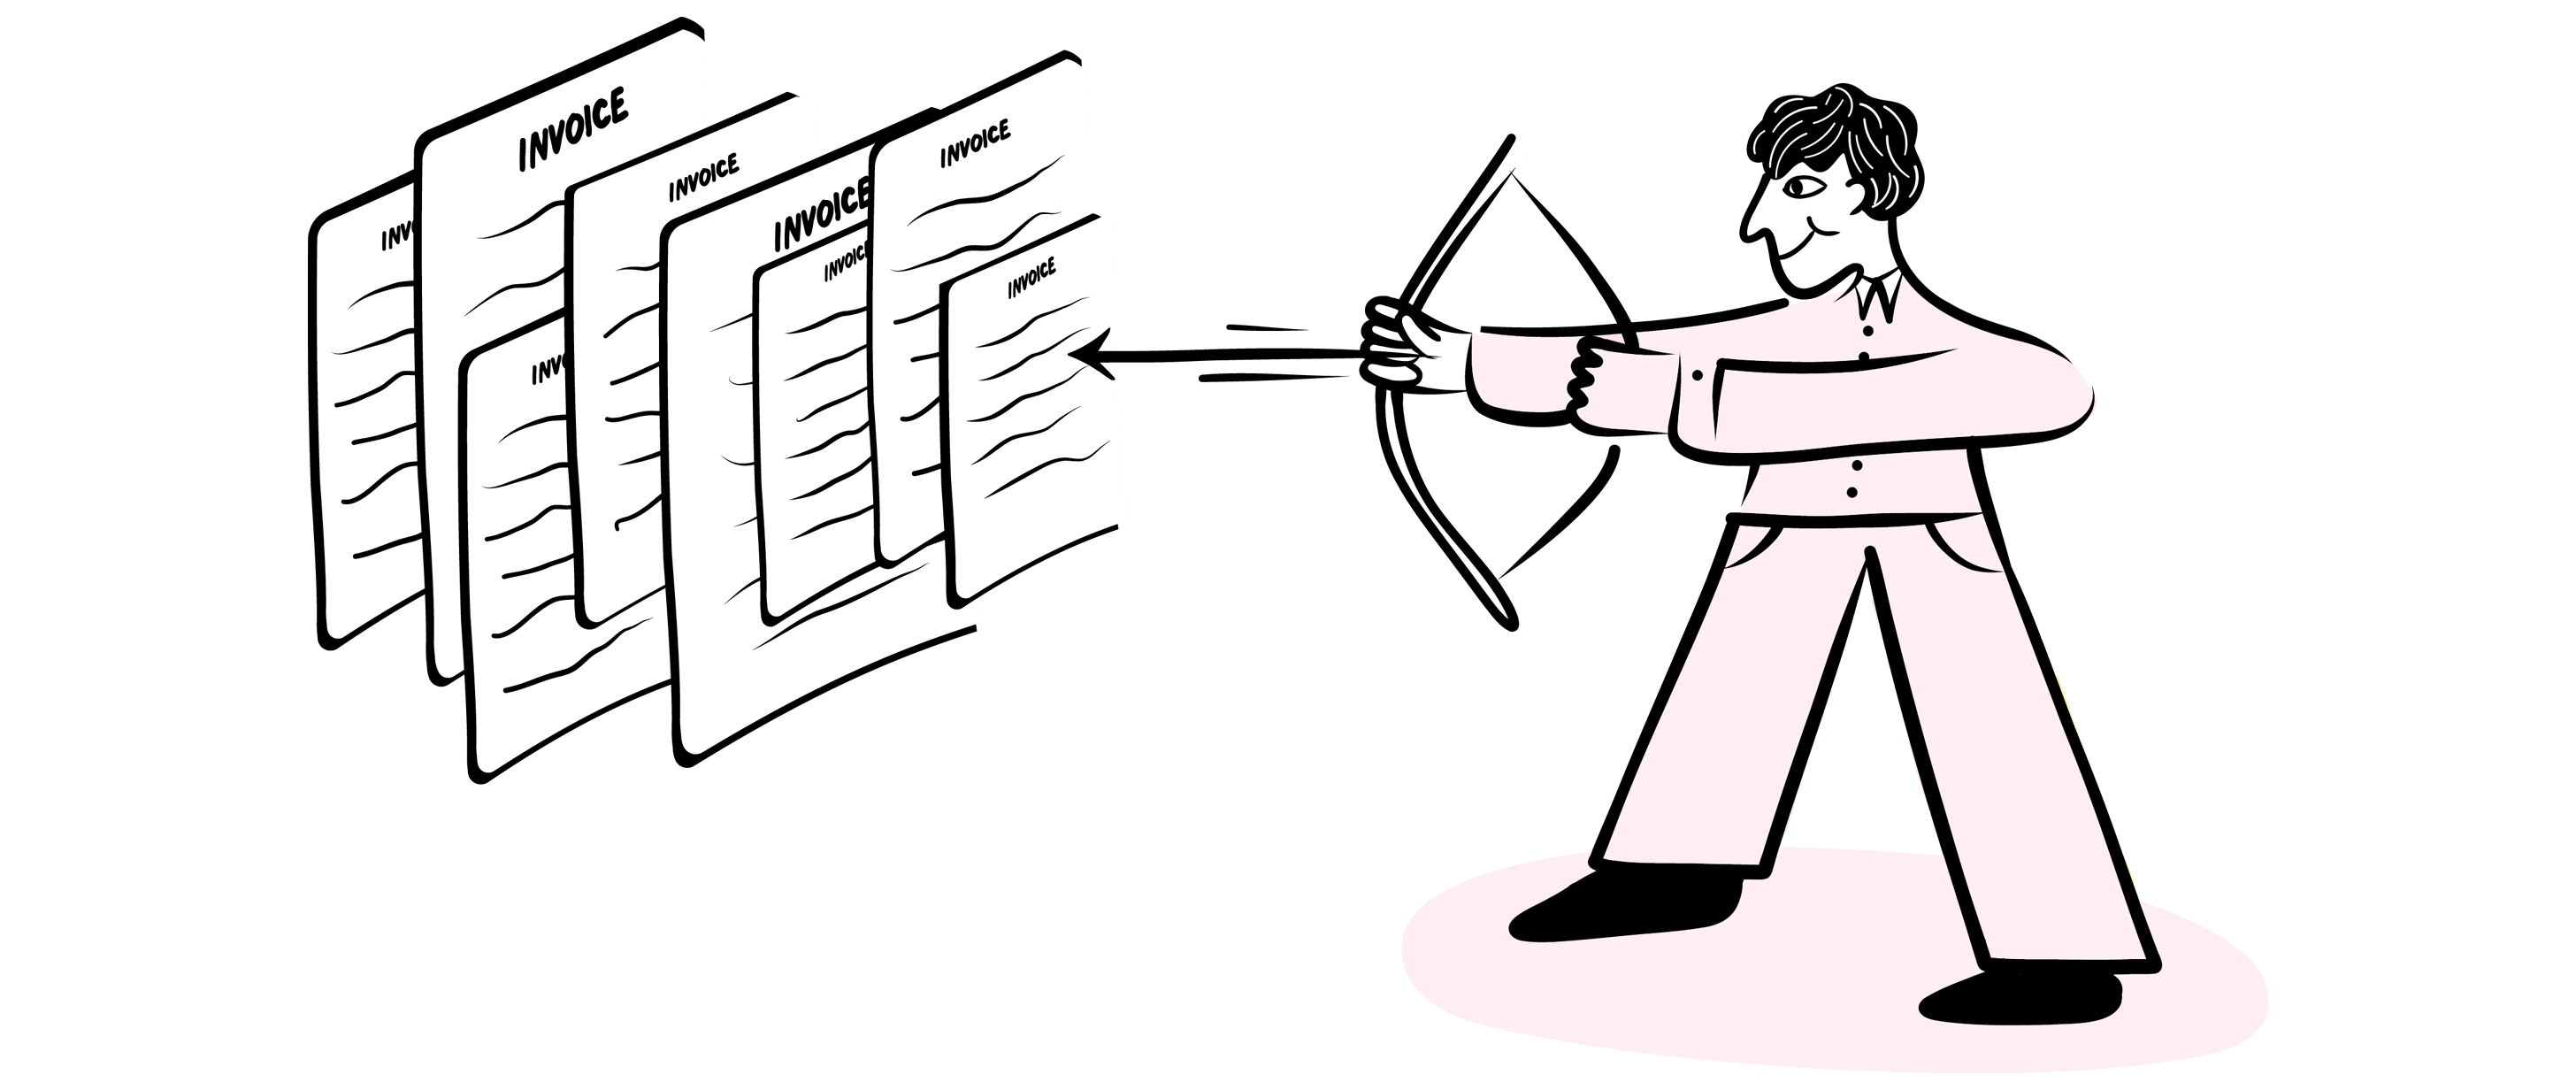 person with arrow pinning invoices